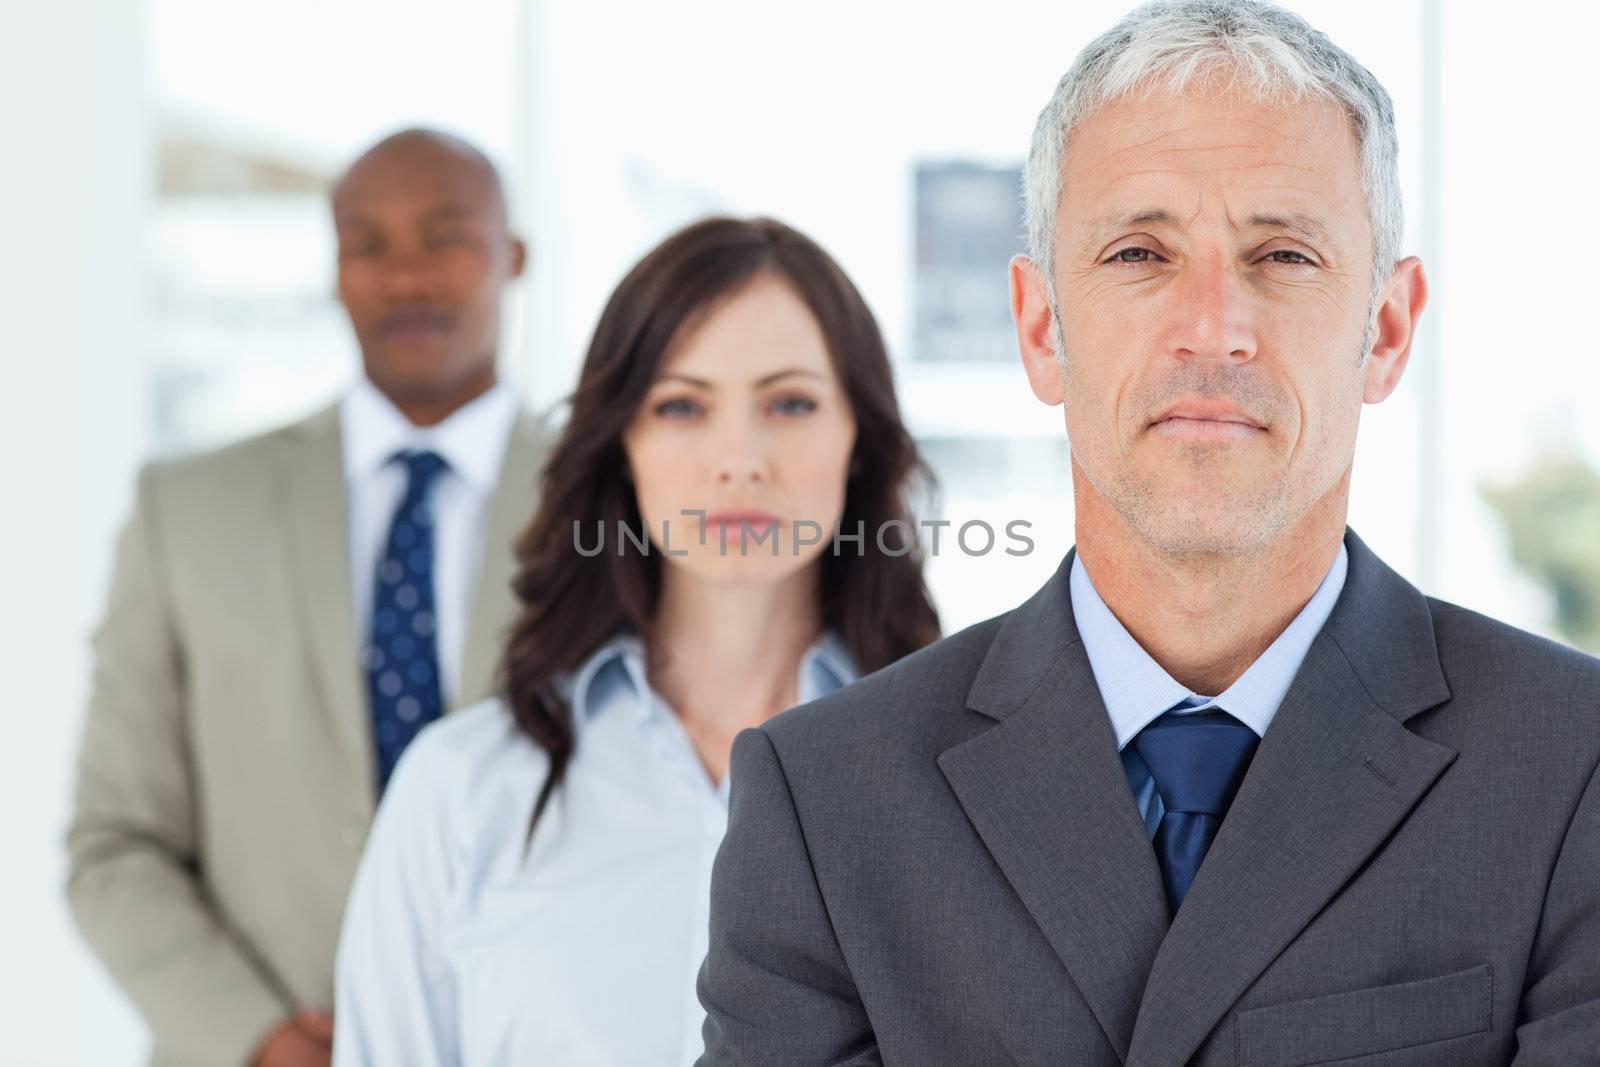 Mature manager standing upright and followed by two serious employees